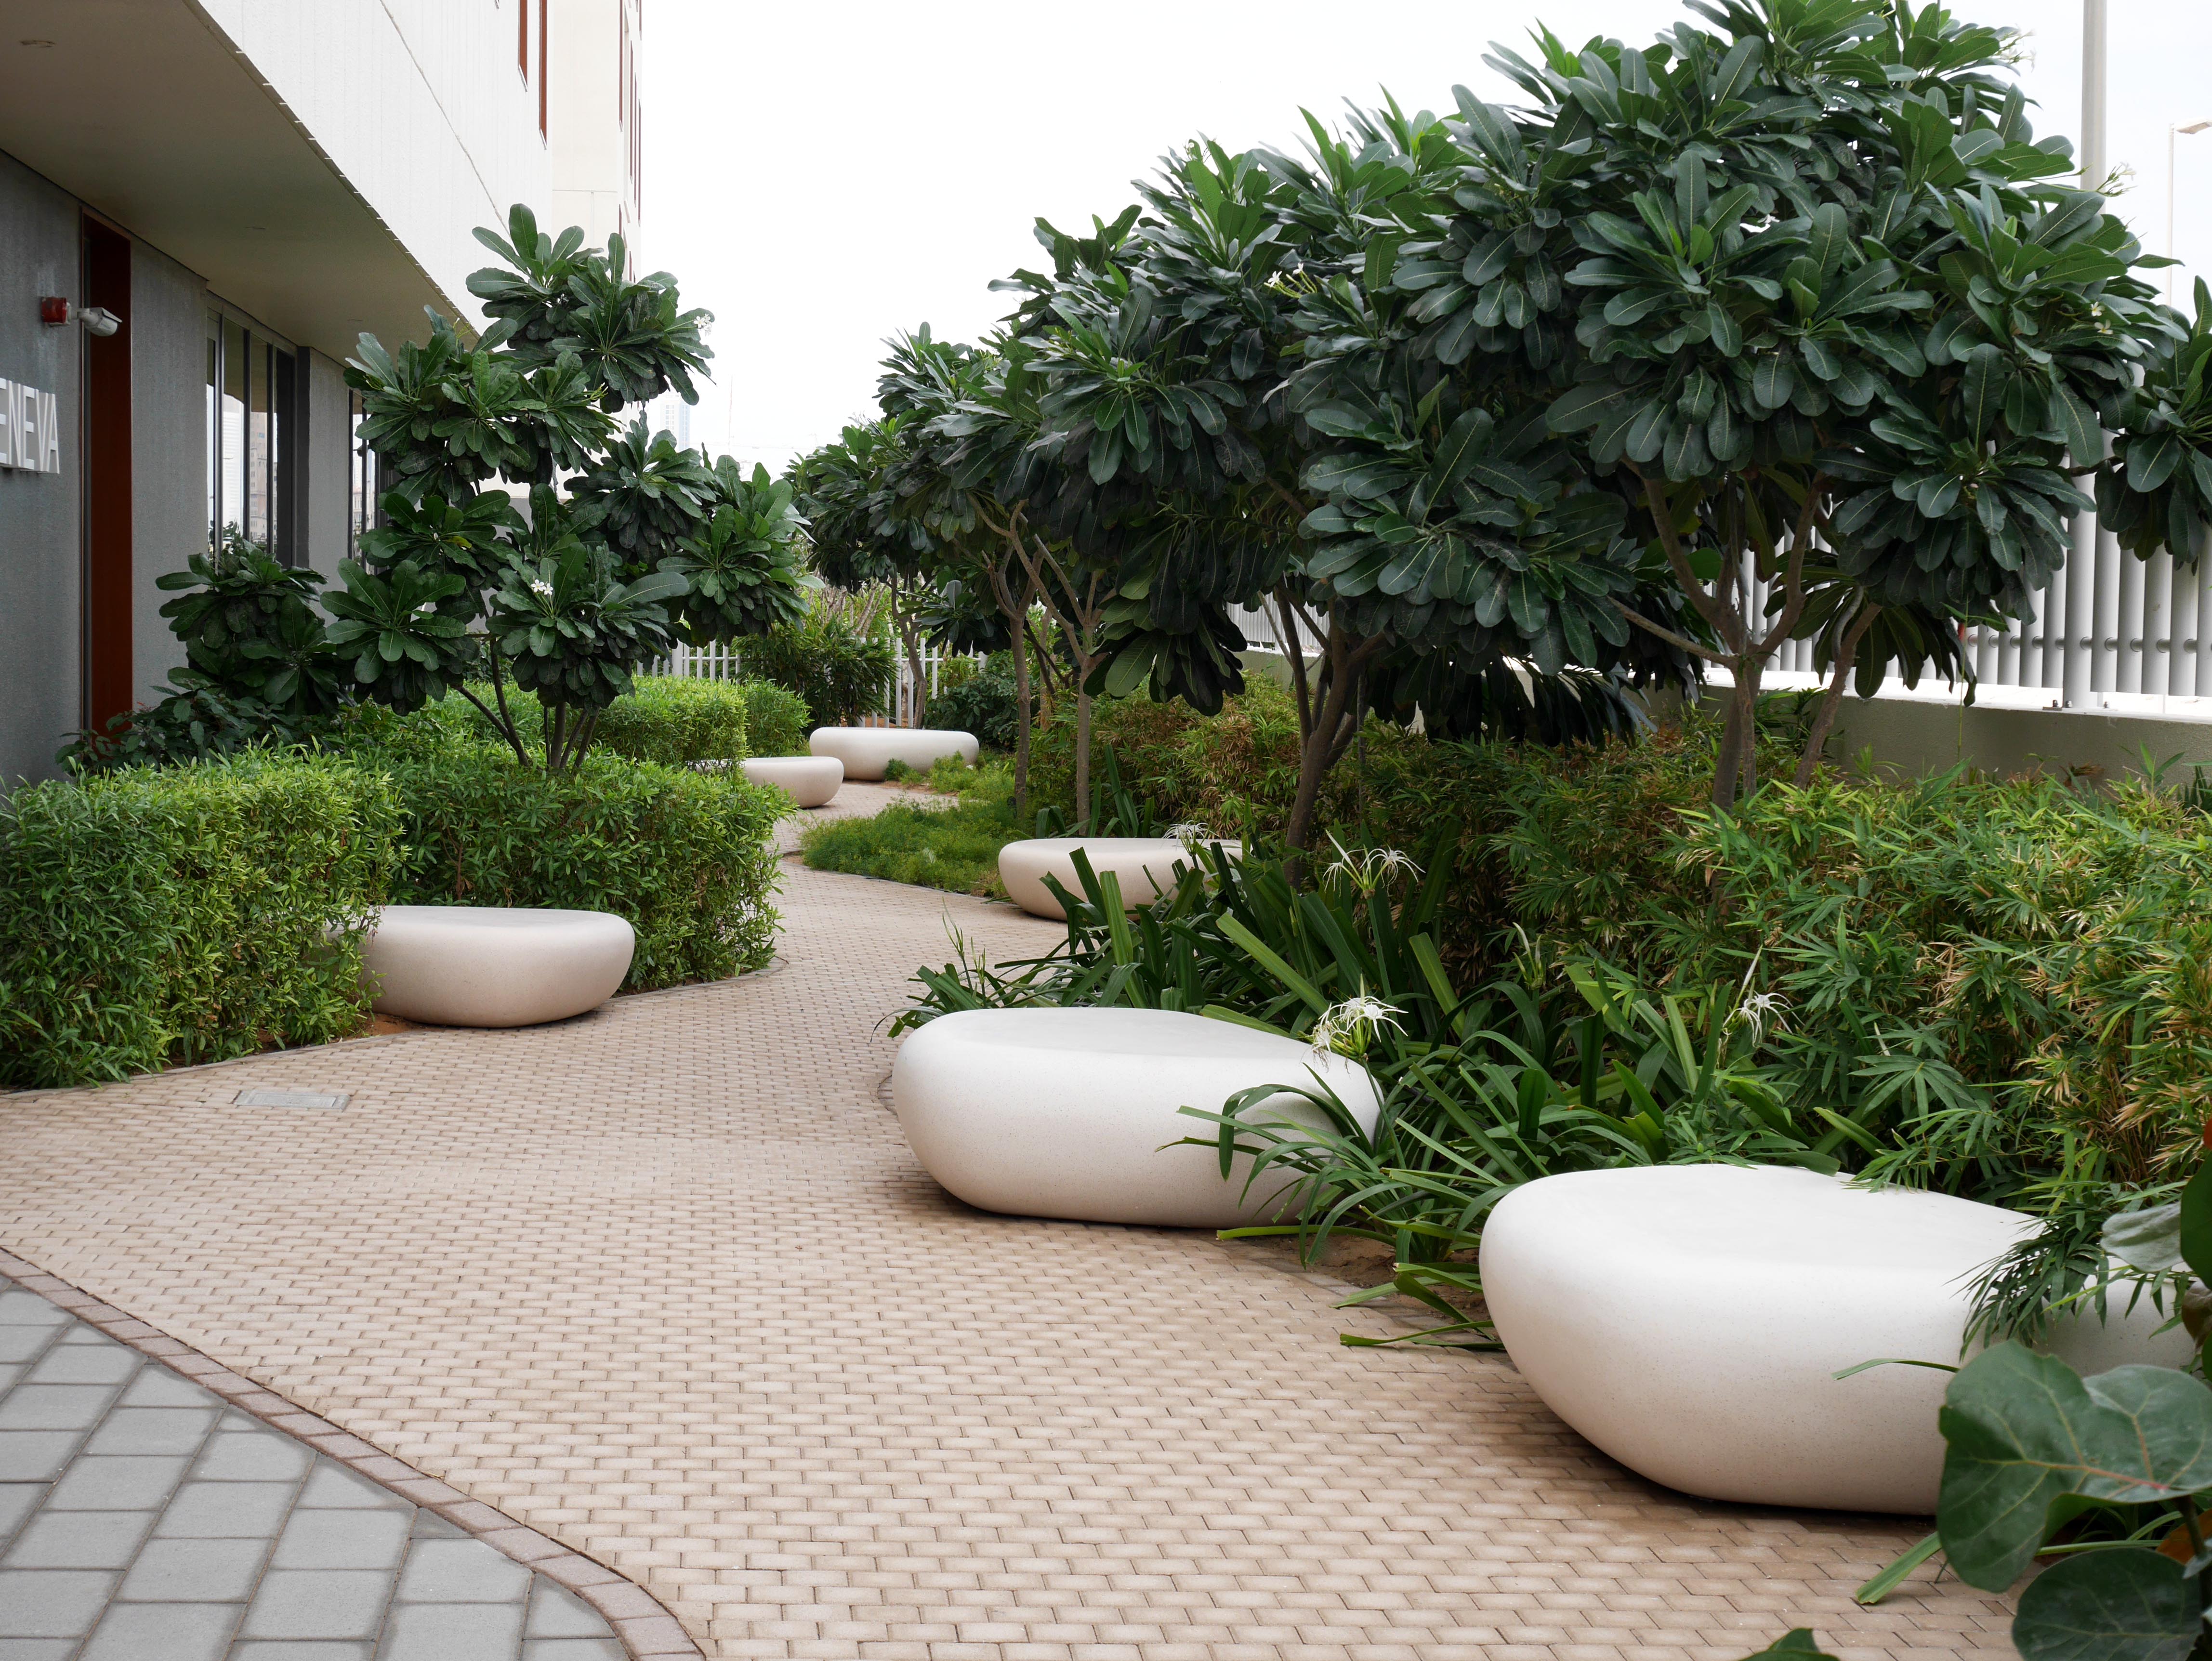 A beige brick walkway surrounded by trees and bushes. Bean shaped concrete benches line the walkway.